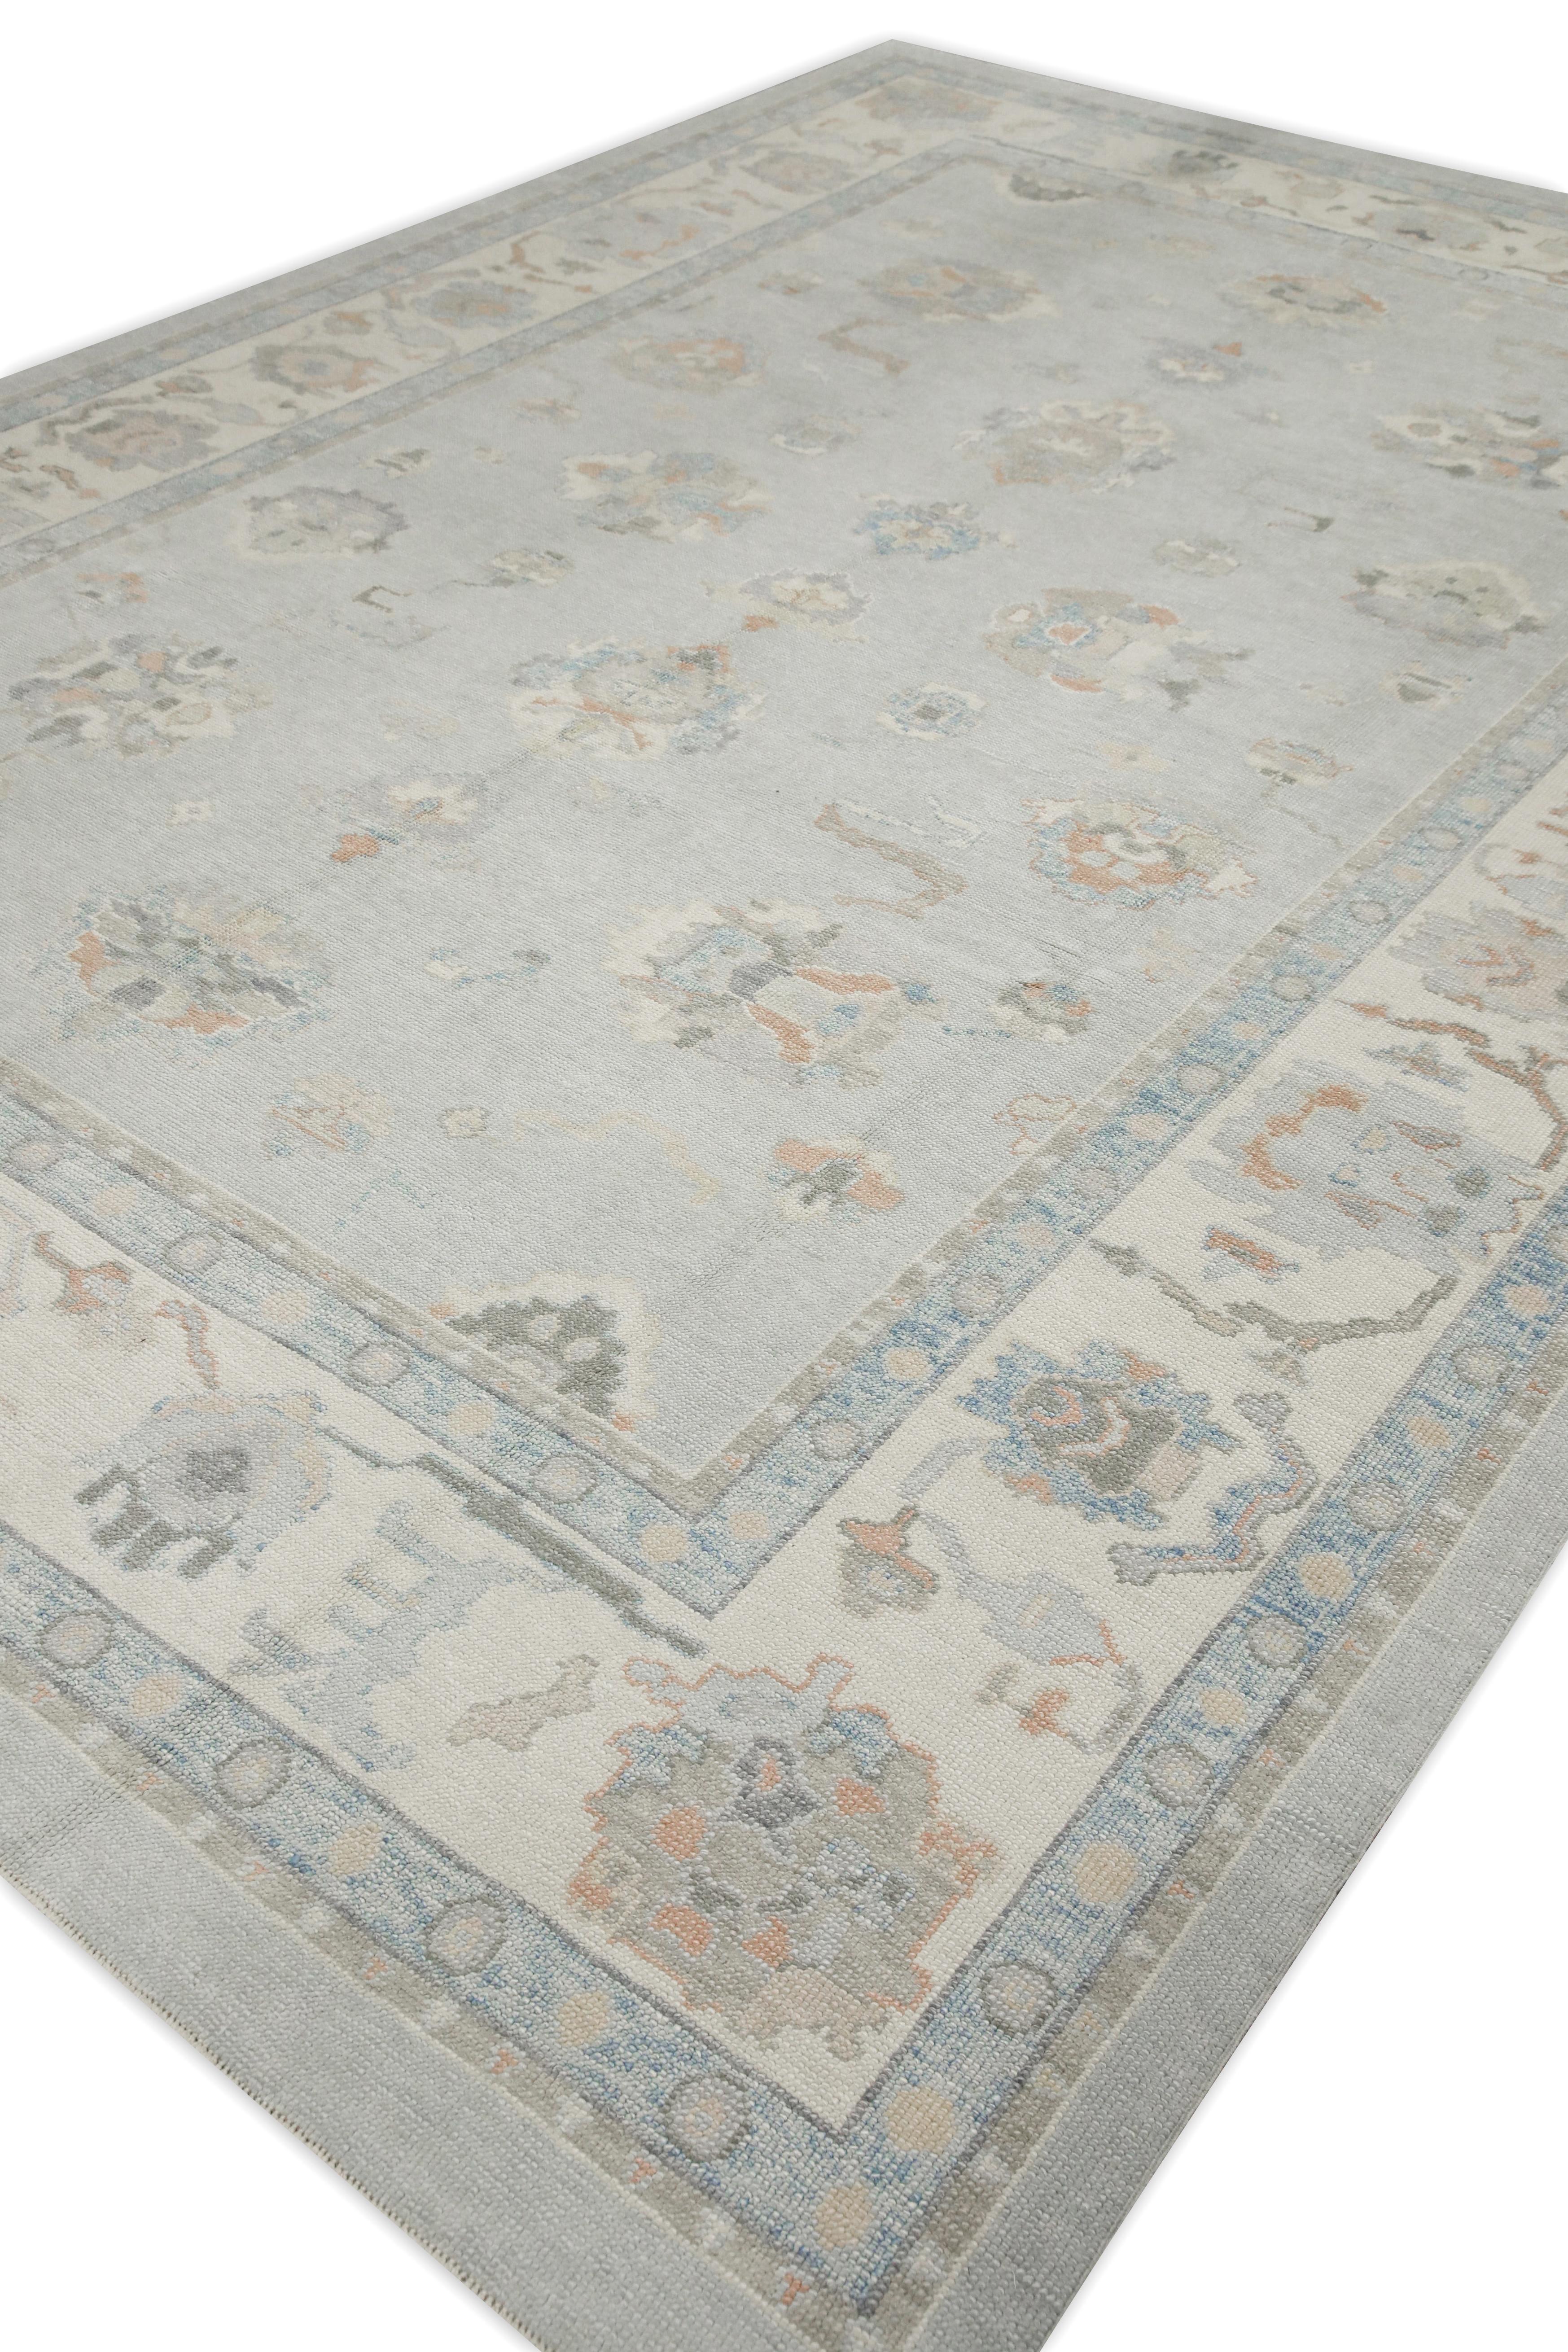 Contemporary Blue Floral Design Handwoven Wool Turkish Oushak Rug 9'8